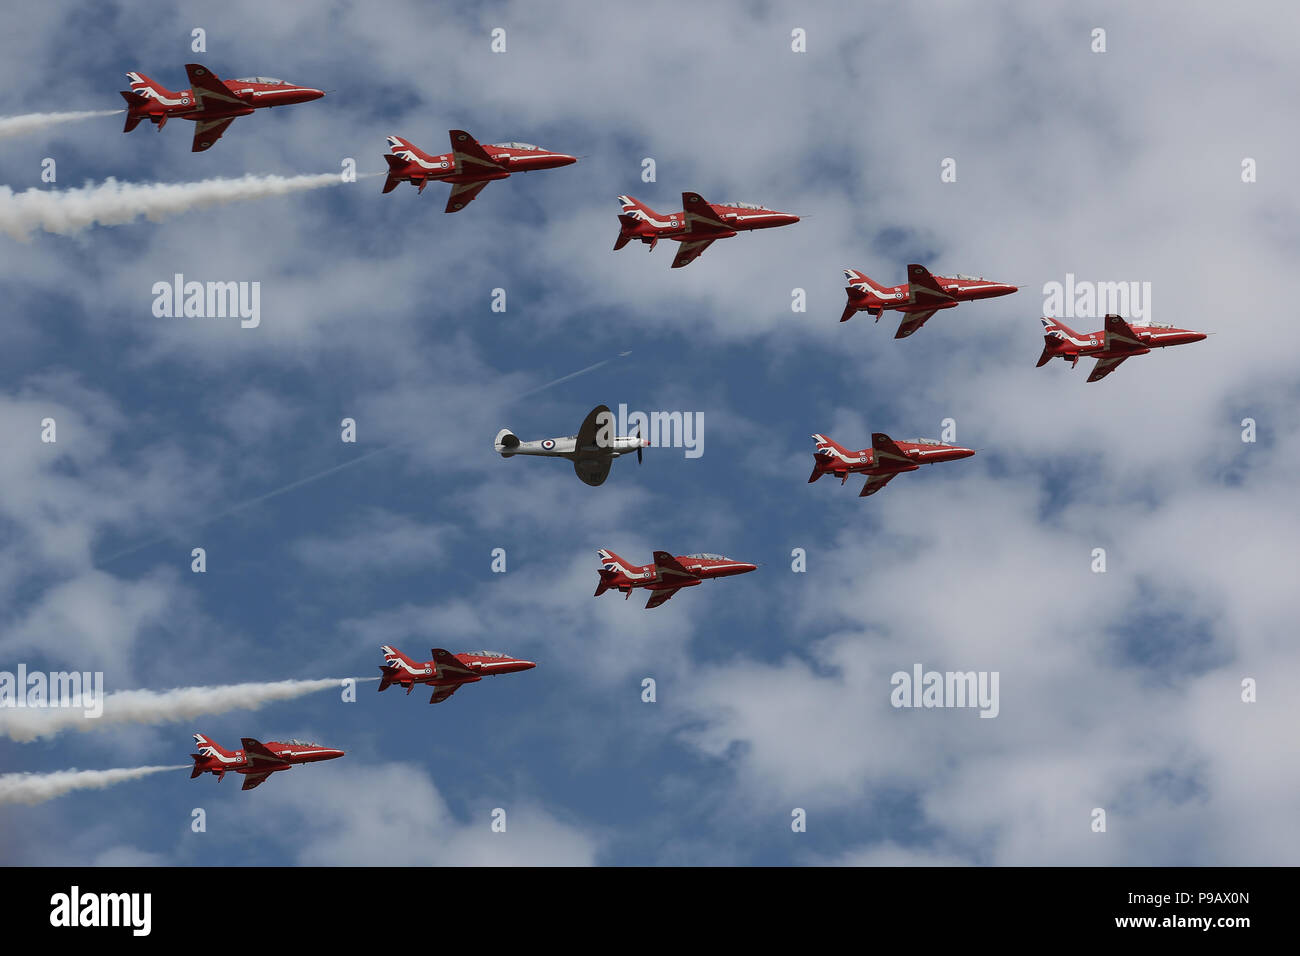 Farnborough, UK. 16th July 2018. The Royal Air Force Aerobatic Team, the Red Arrows, perform a flypast with a Supermarine Spitfire to open the 2018 Farnborough International Airshow, one of the biggest aviation trade and industry events in the world, held in the UK. Credit: James Hancock/Alamy Live News Stock Photo